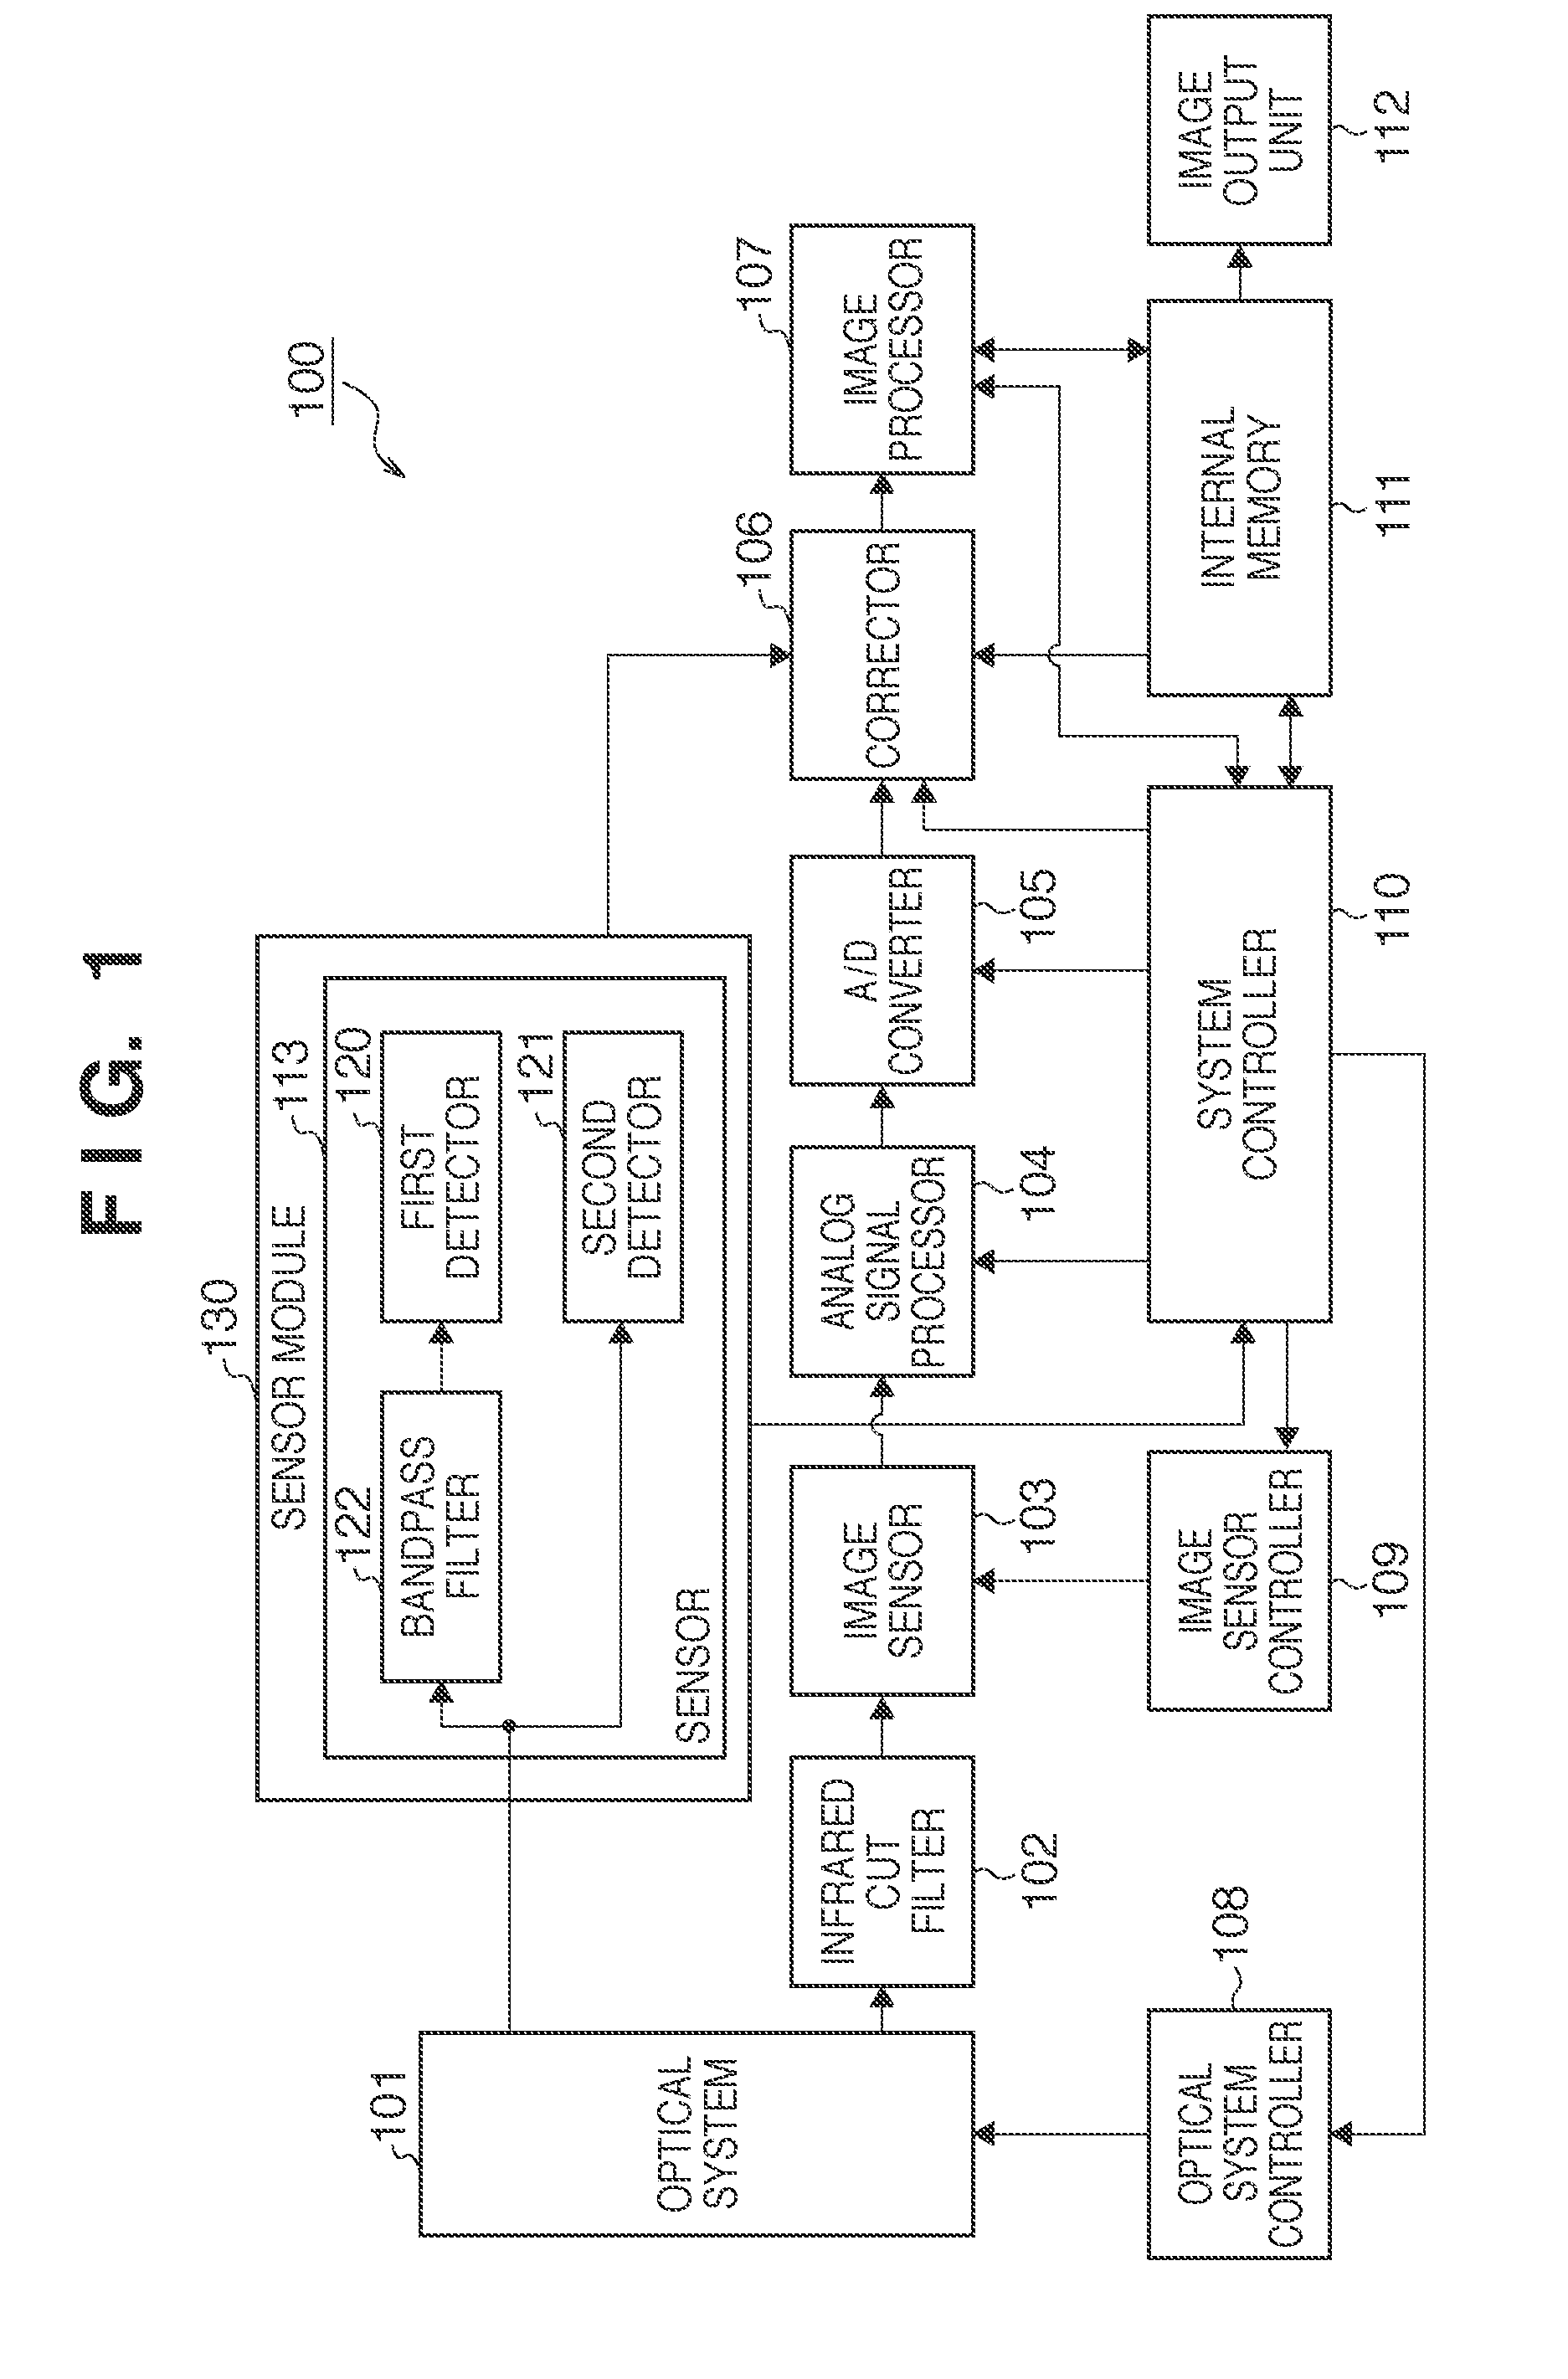 Image sensing system and correction method